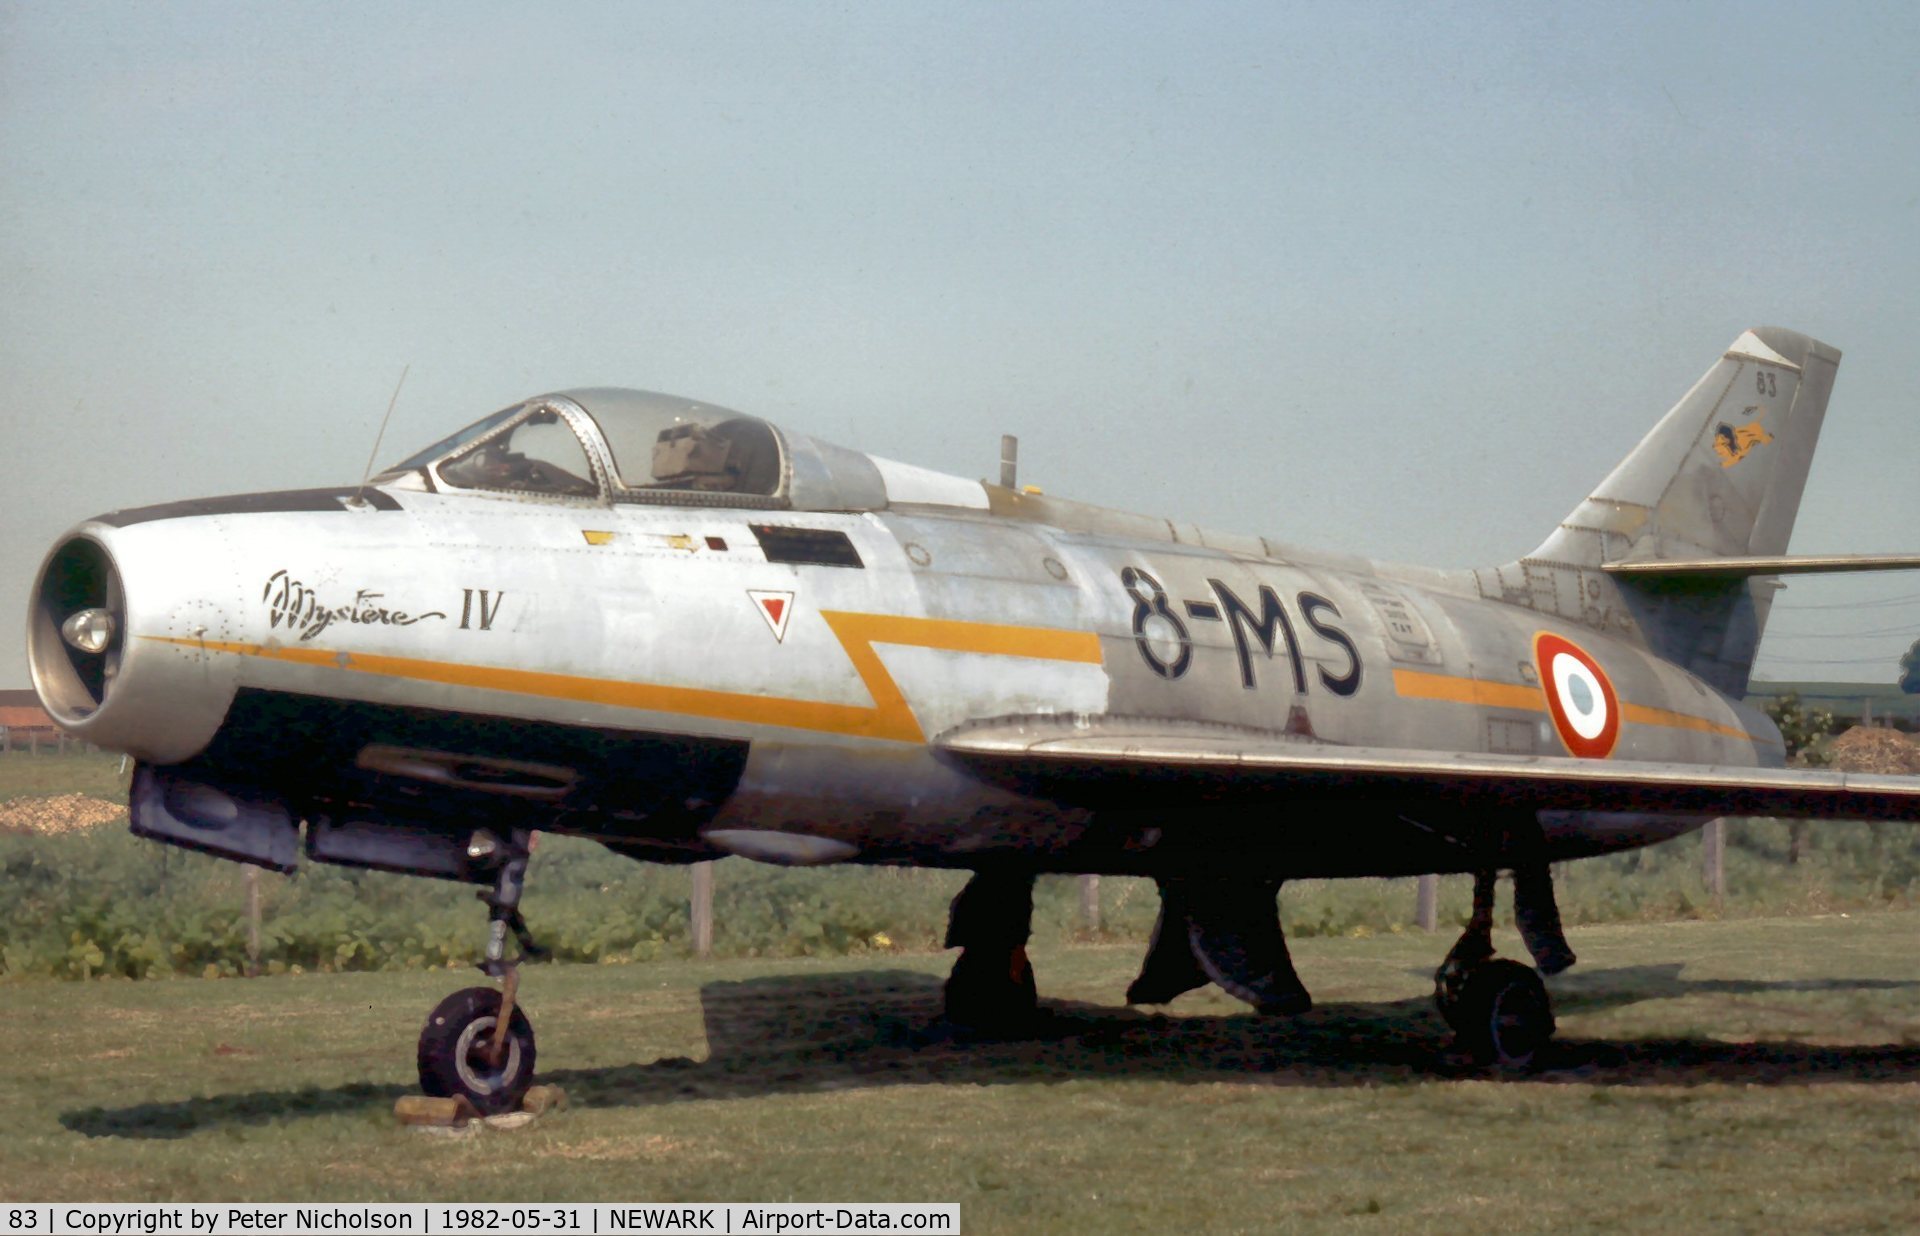 83, Dassault MD-454 Mystere IVA C/N 83, Ex French Air Force Mystere IV.A as displayed at the Newark Air Museum in May 1982.